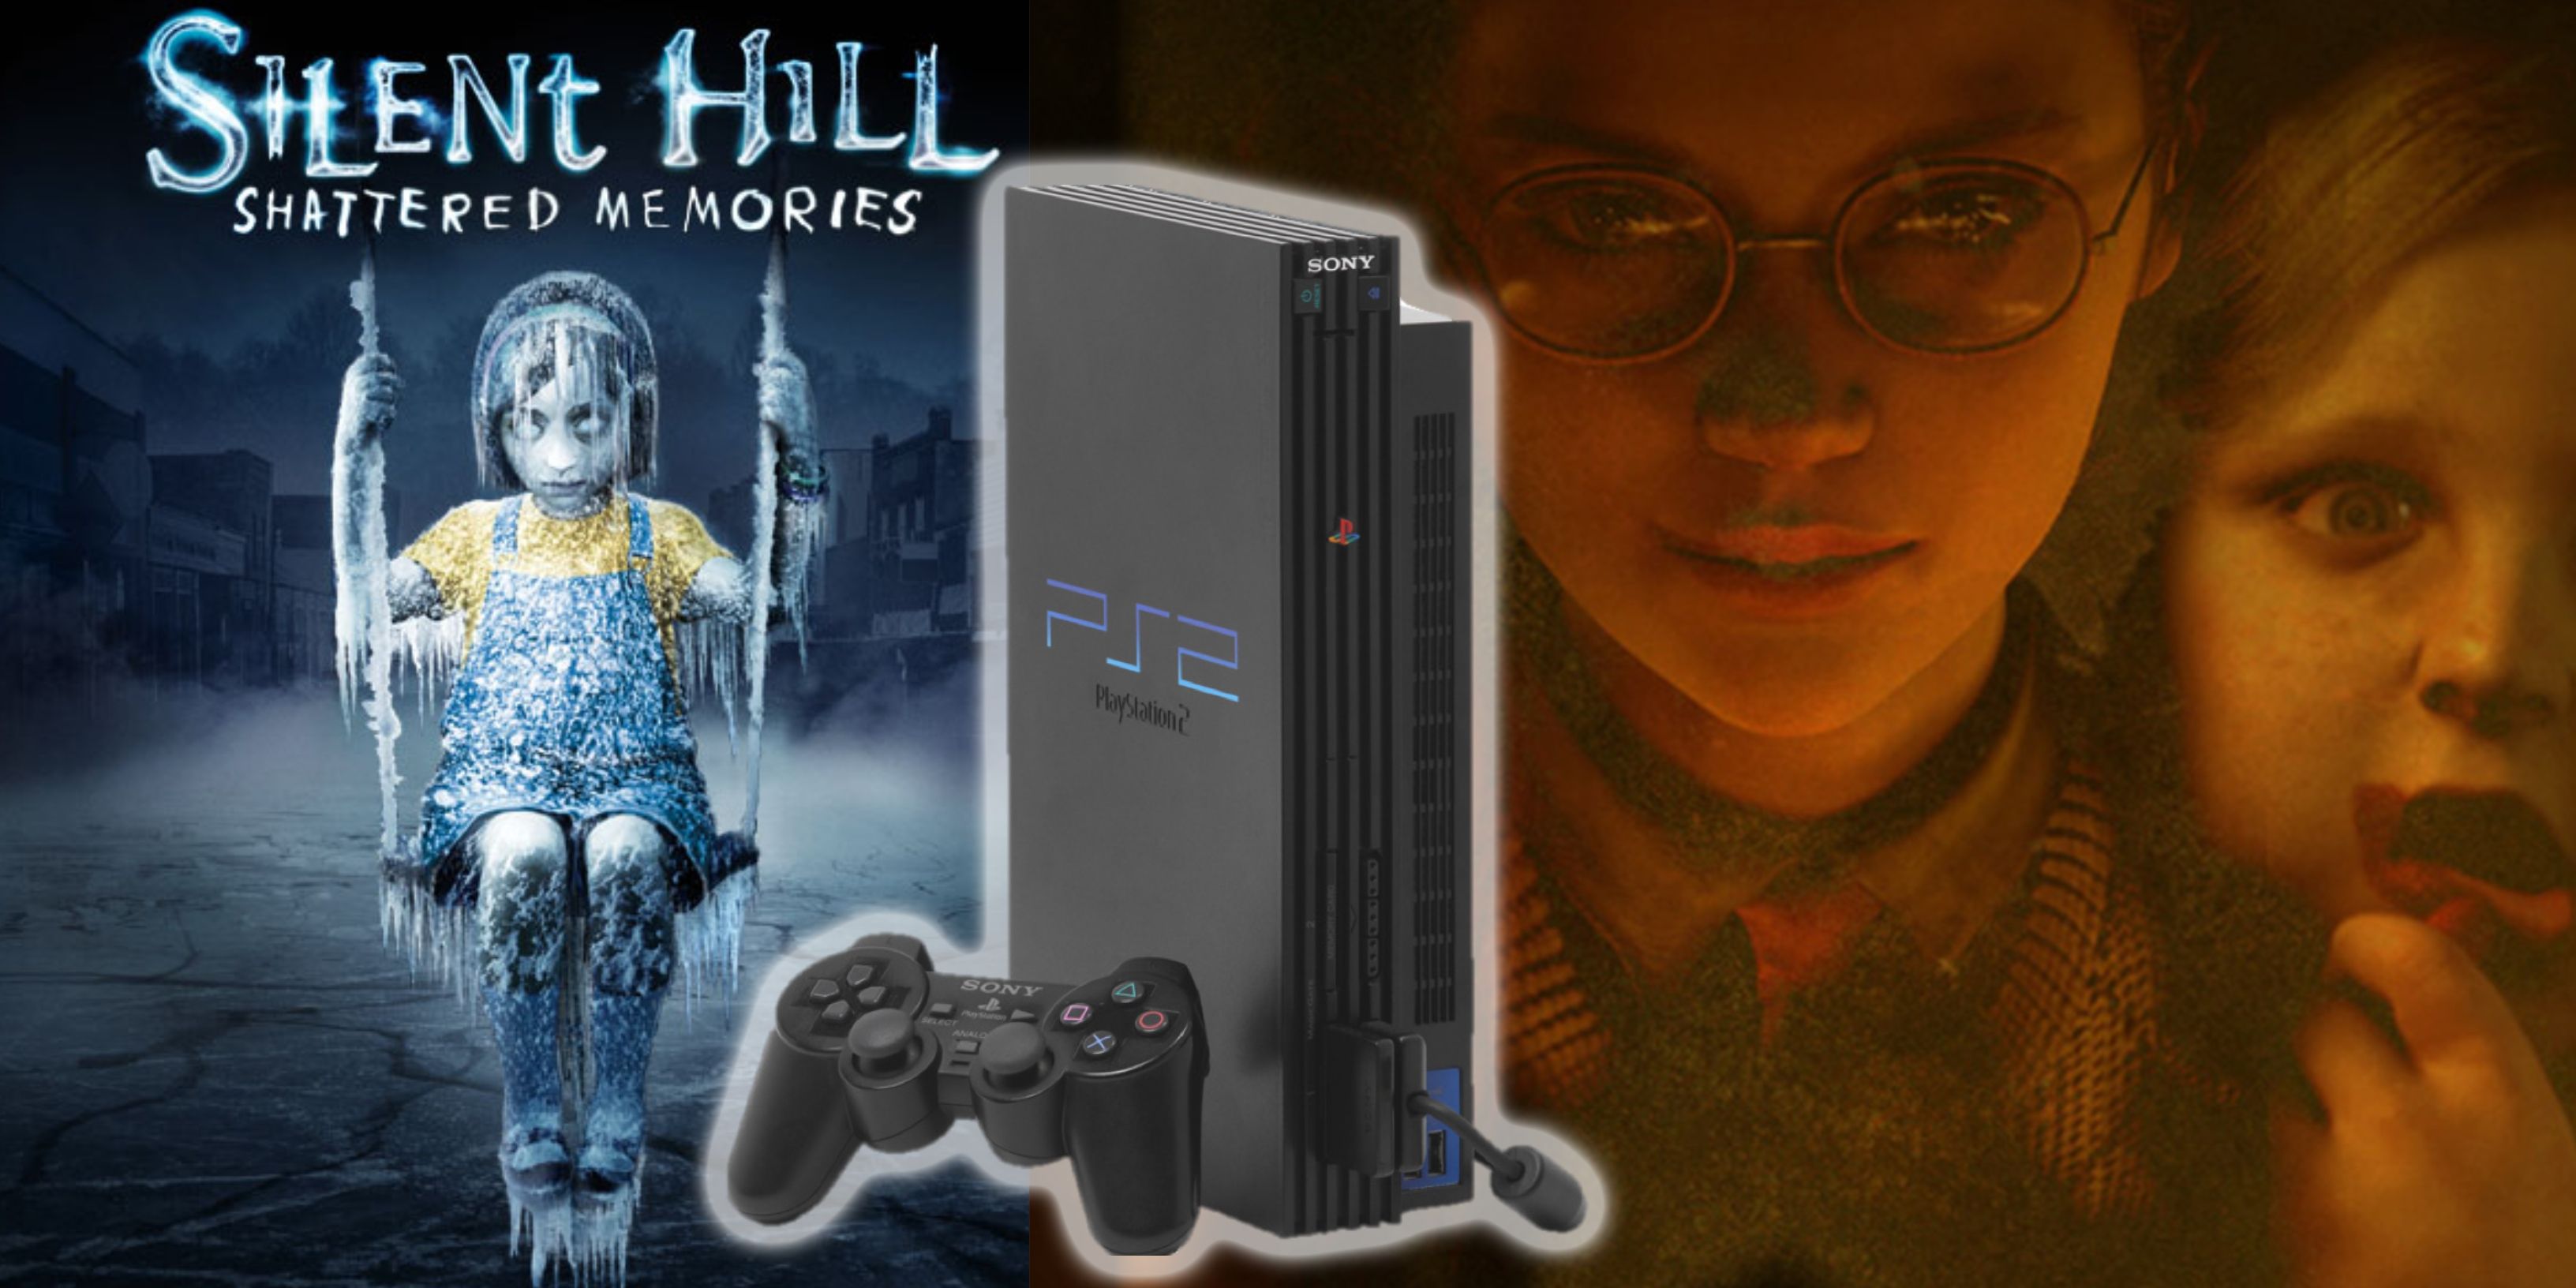 A PlayStation 2 featuring Silent Hill: Shattered Memories and Rule of Rose cover art